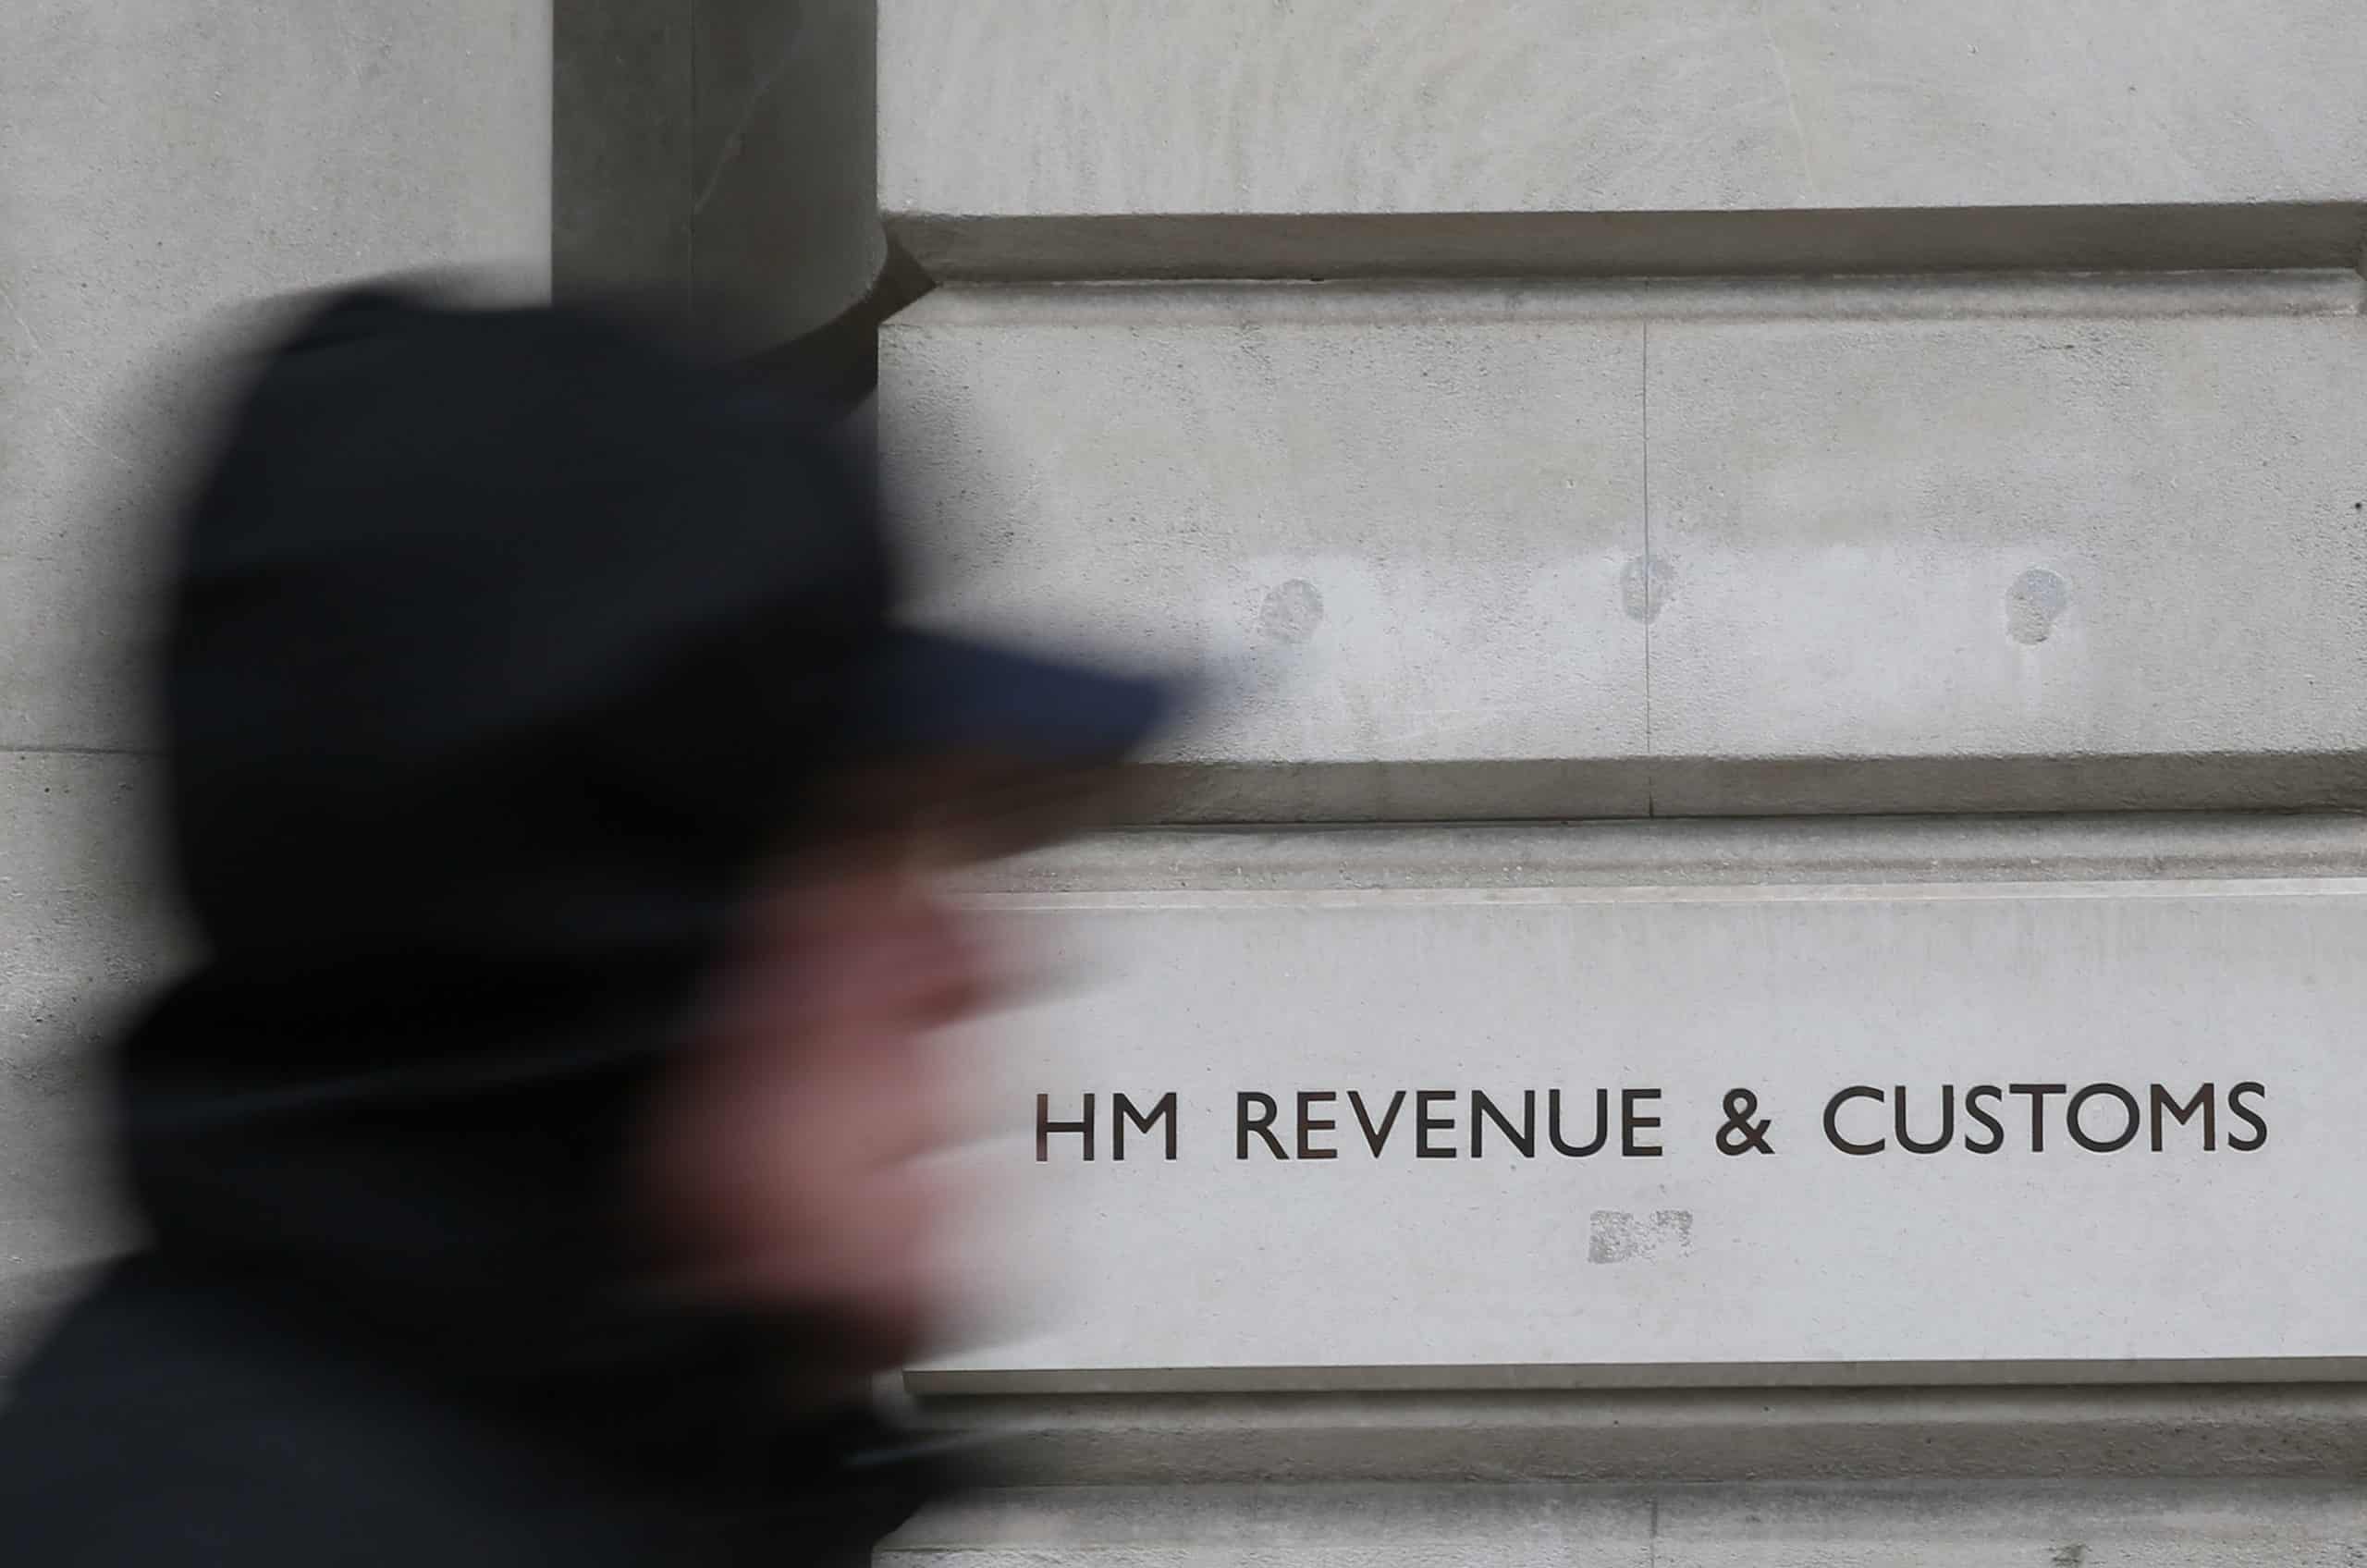 HMRC seized NFTs for the first time from the $1.8m fraud case